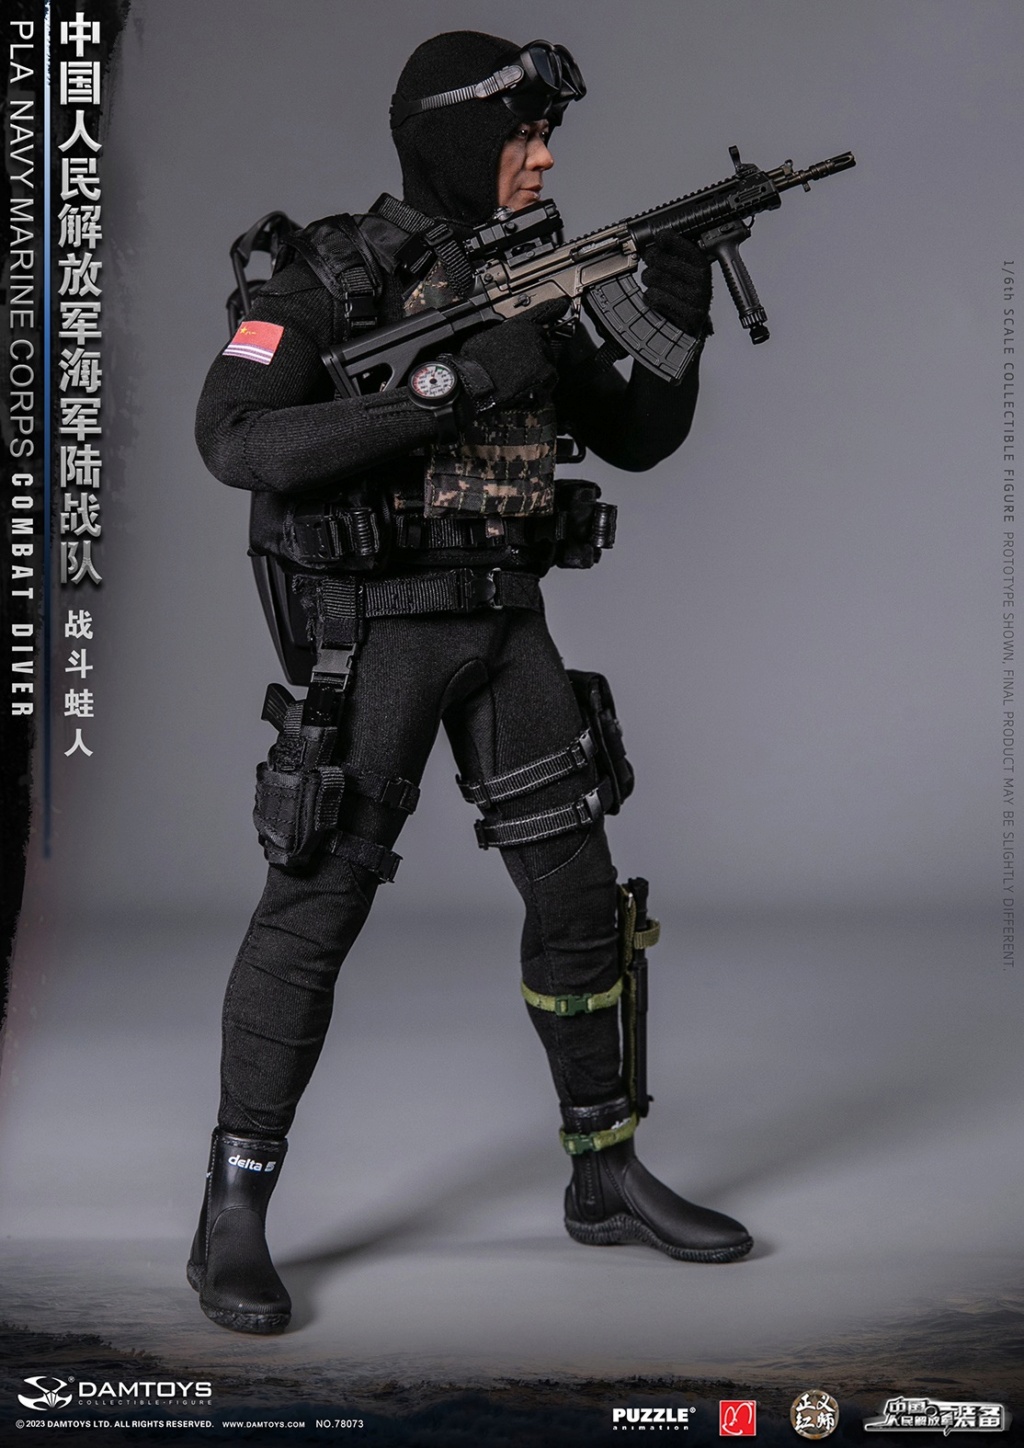 CombatFrogman - NEW PRODUCT: DAMToys: 1/6 Chinese People's Liberation Army Marine Corps - Combat Frogman Action Figure #78073 14302512